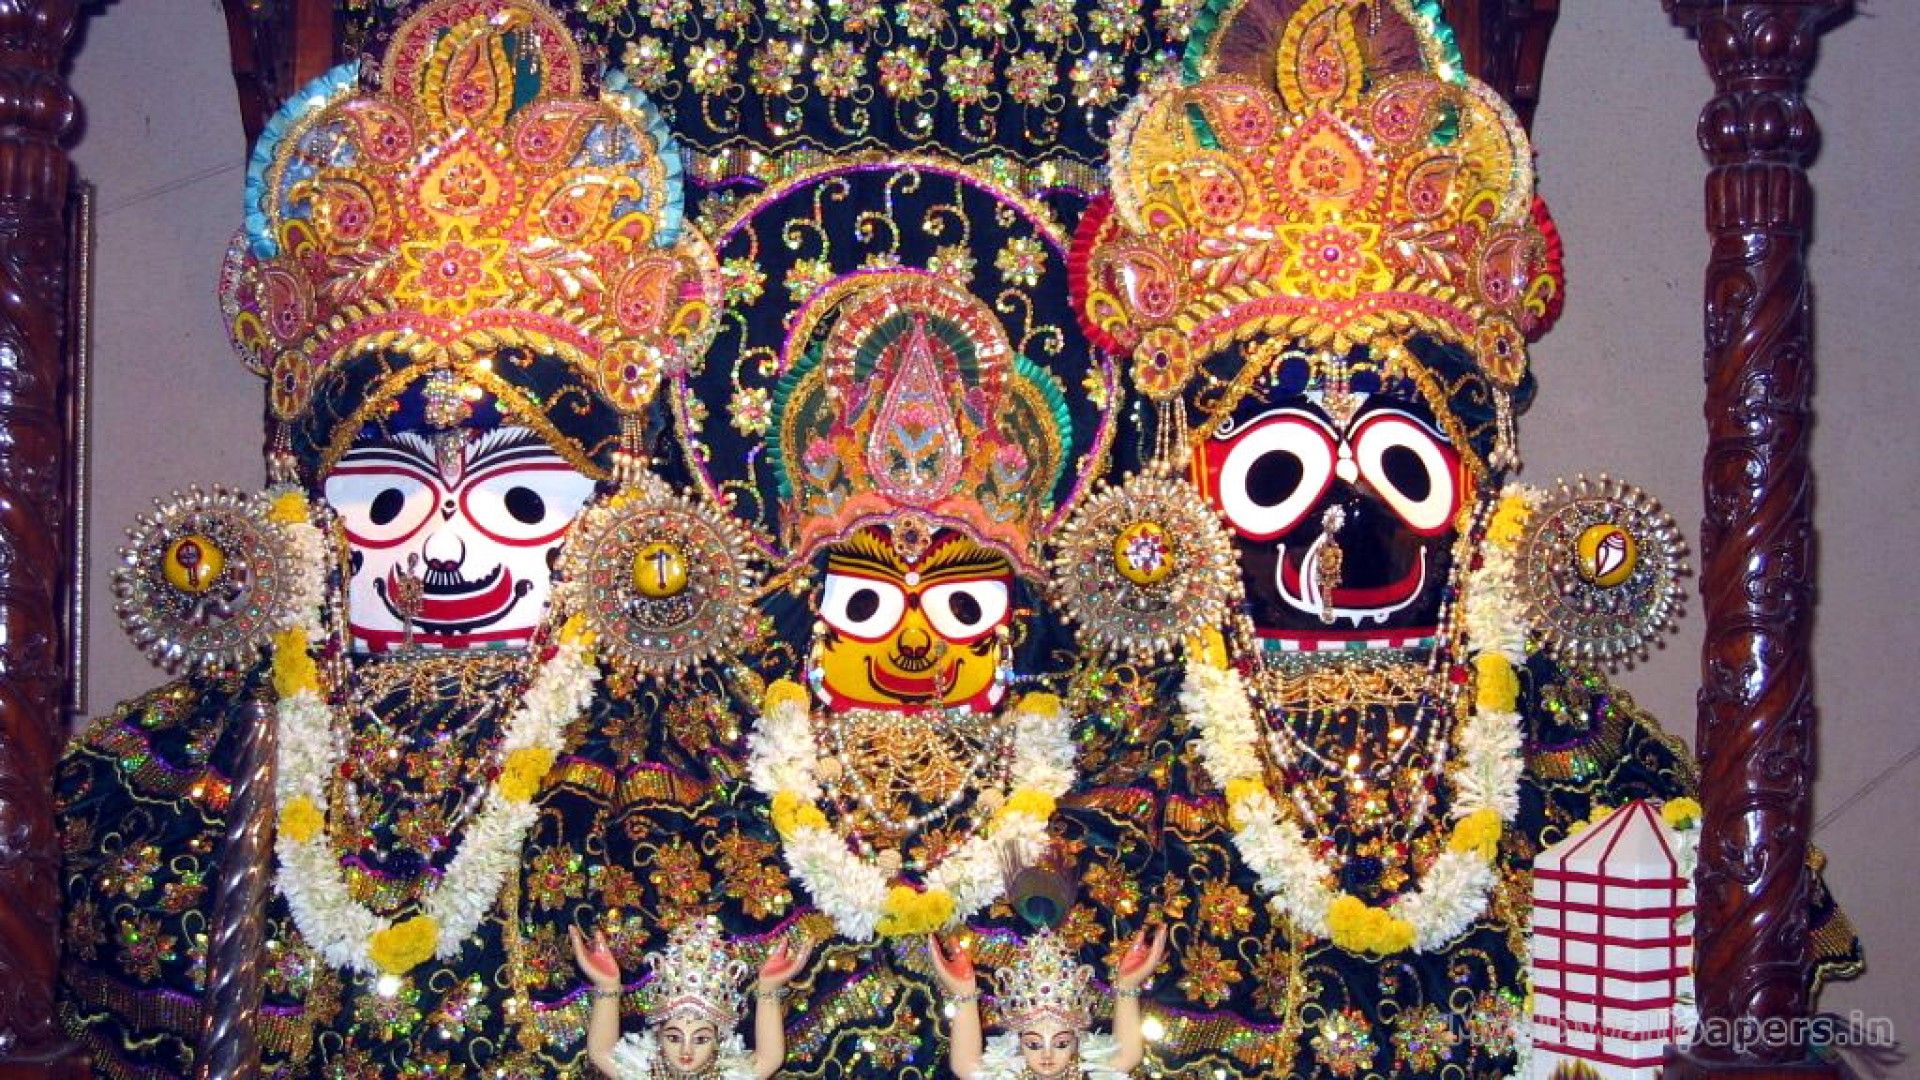 Beautiful Pictures Of Lord Jagannath - HD Wallpaper 